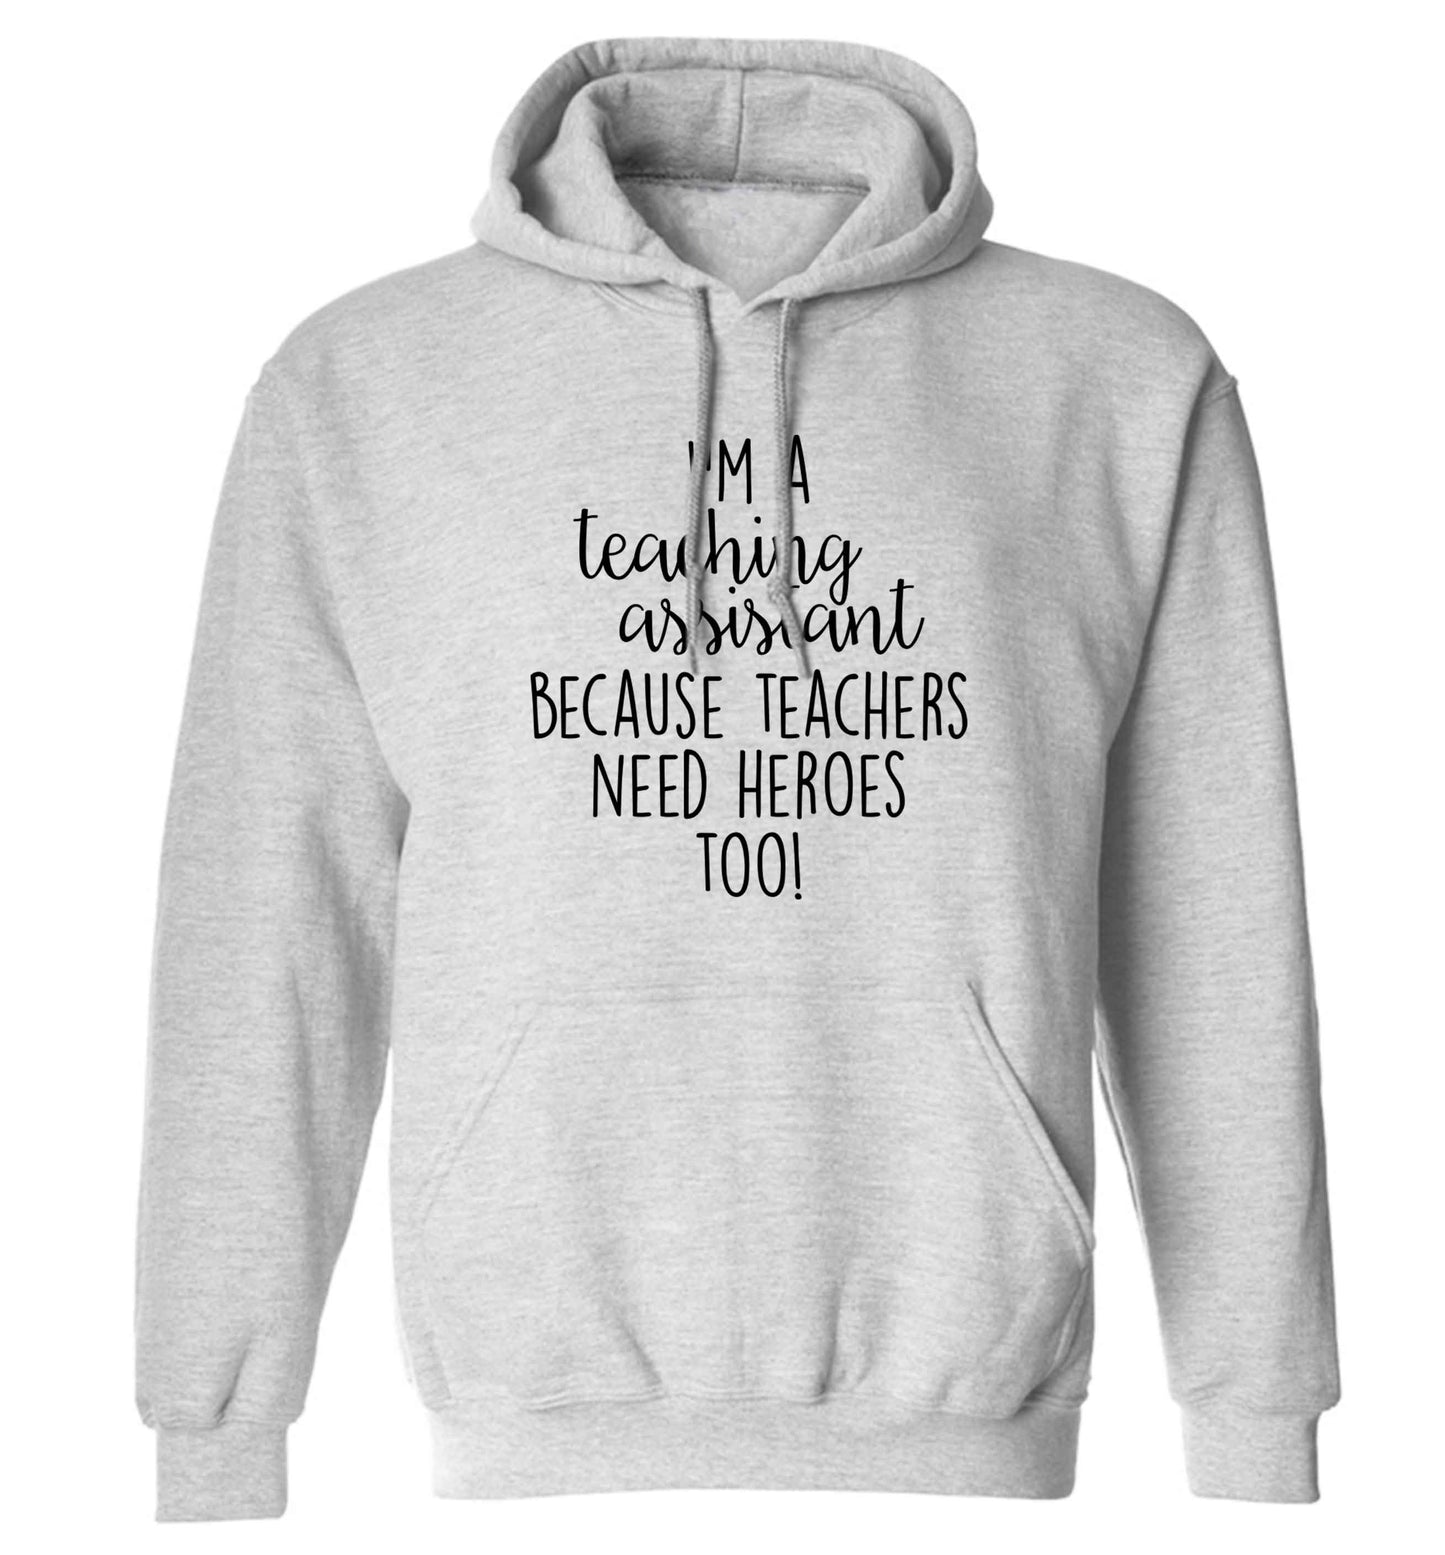 I'm a teaching assistant because teachers need heroes too! adults unisex grey hoodie 2XL